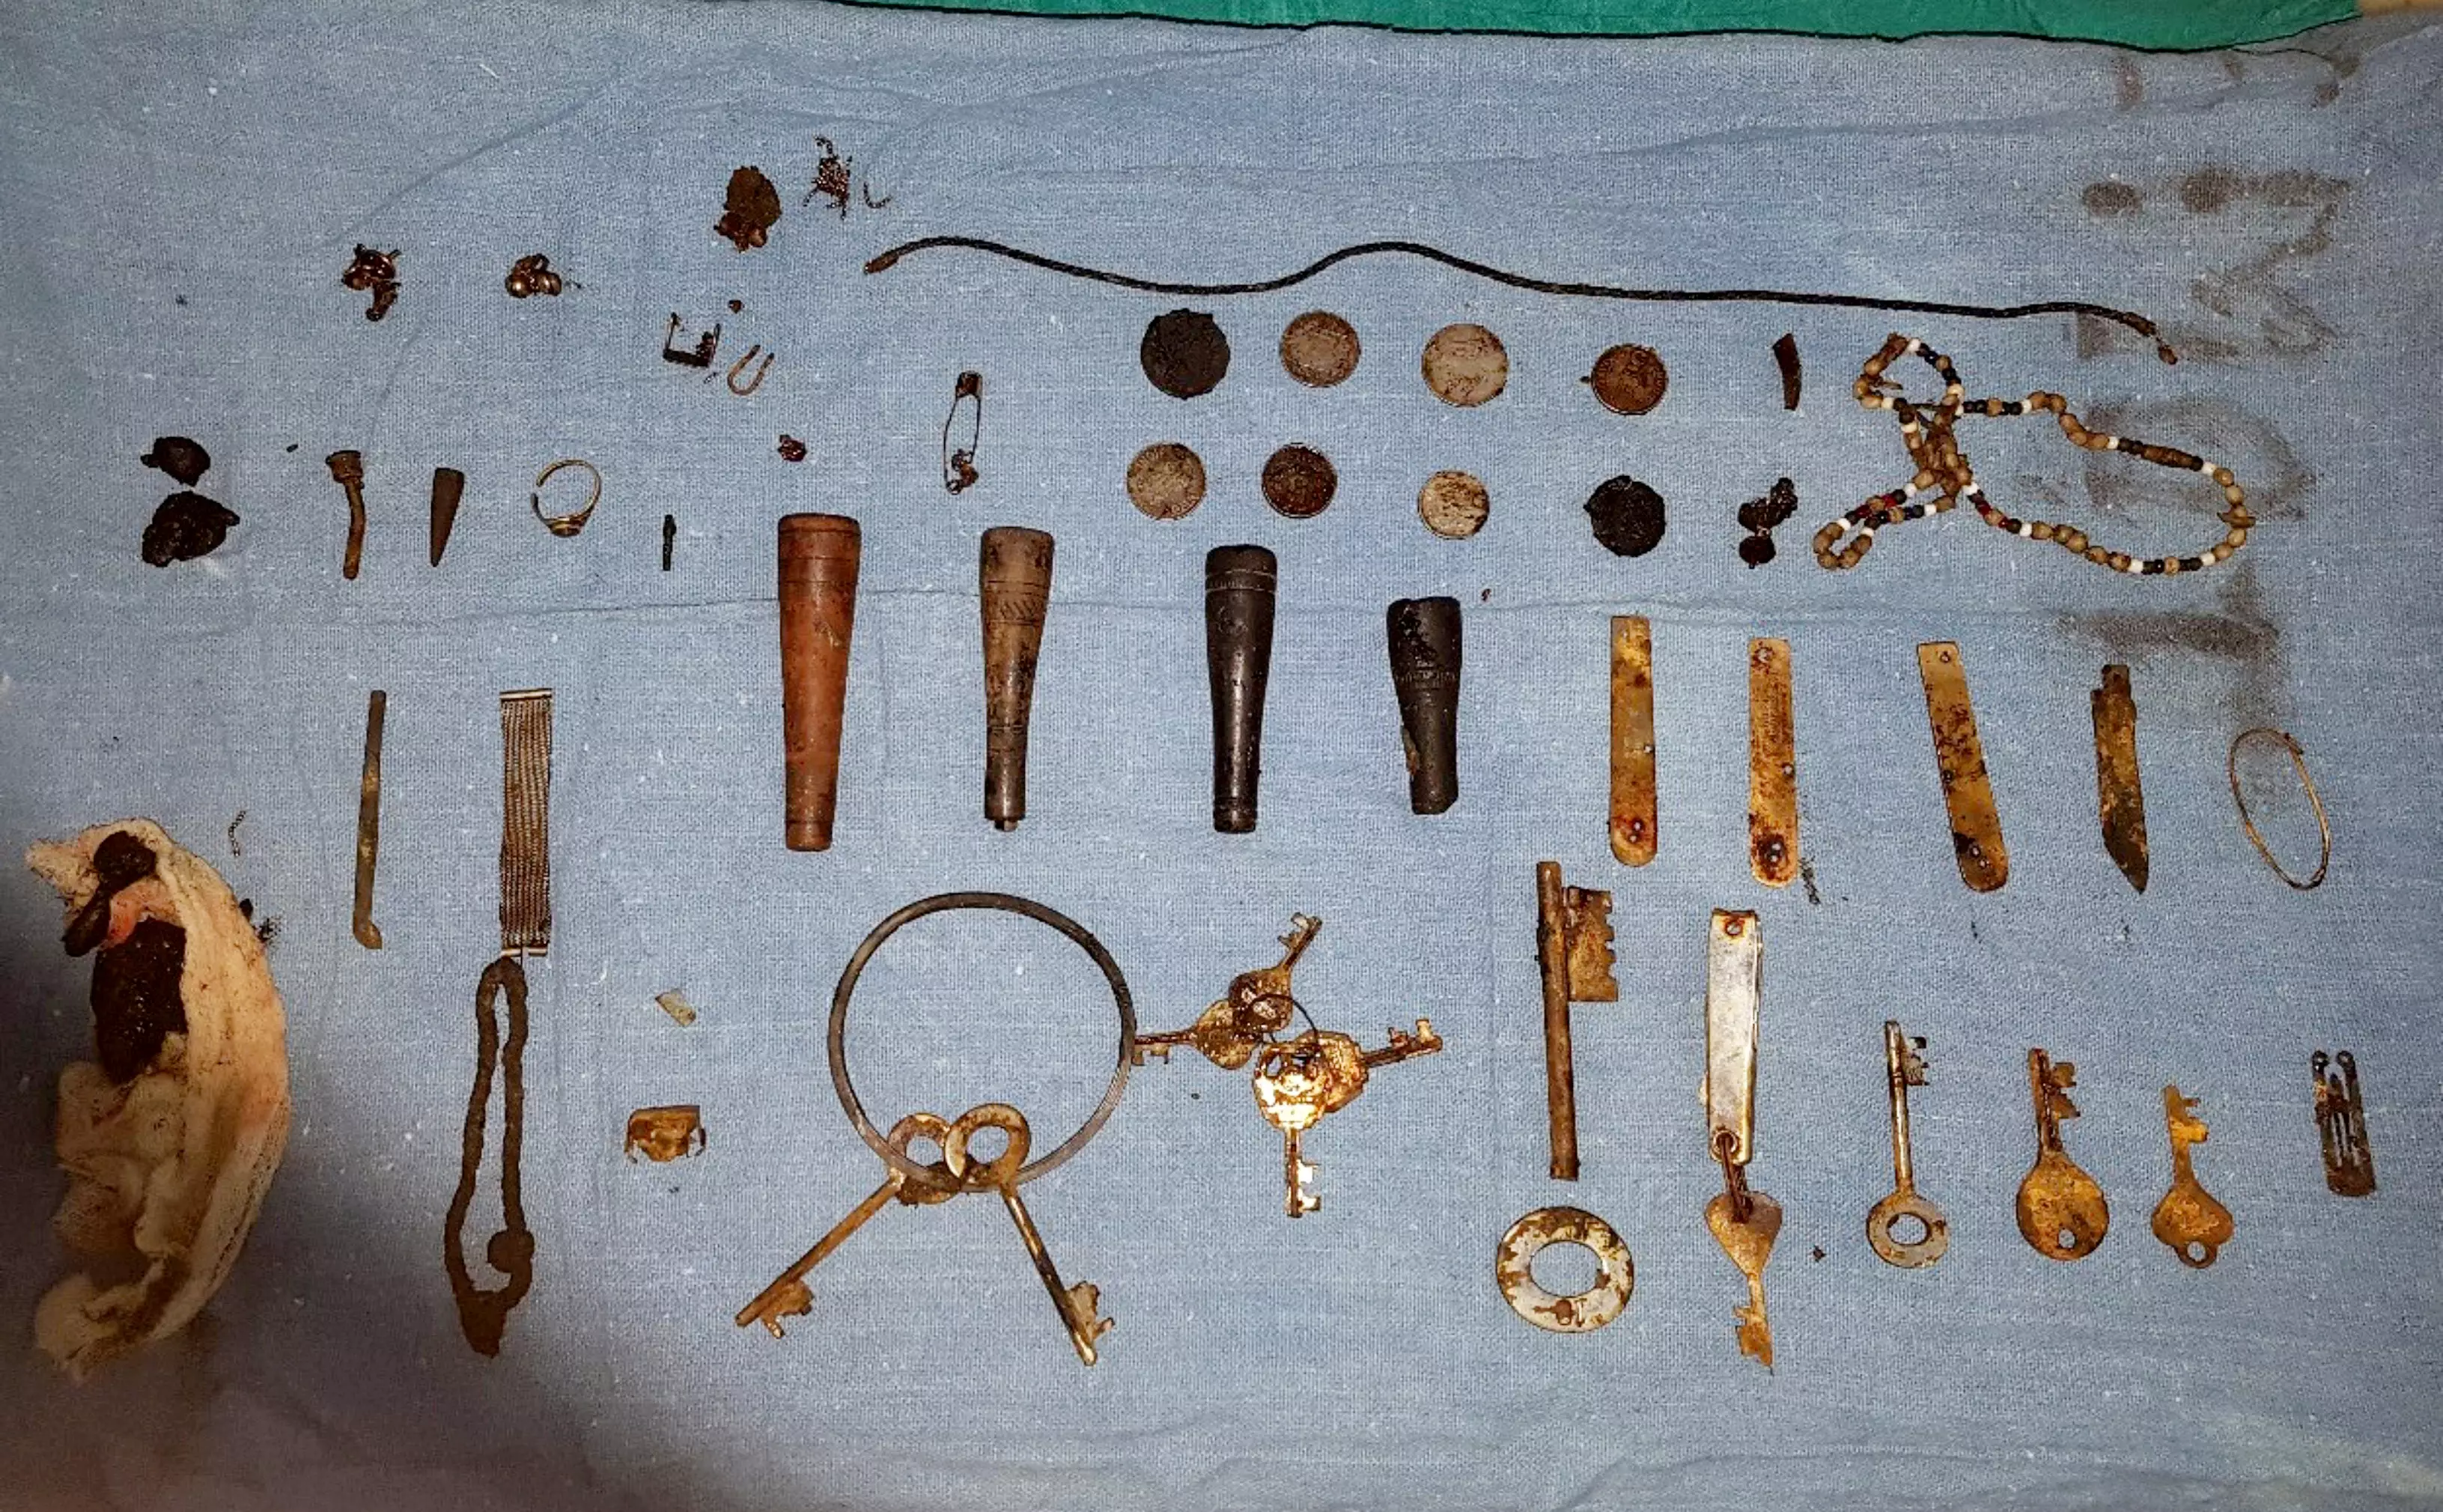 The bizarre haul included coins, knives and keys.